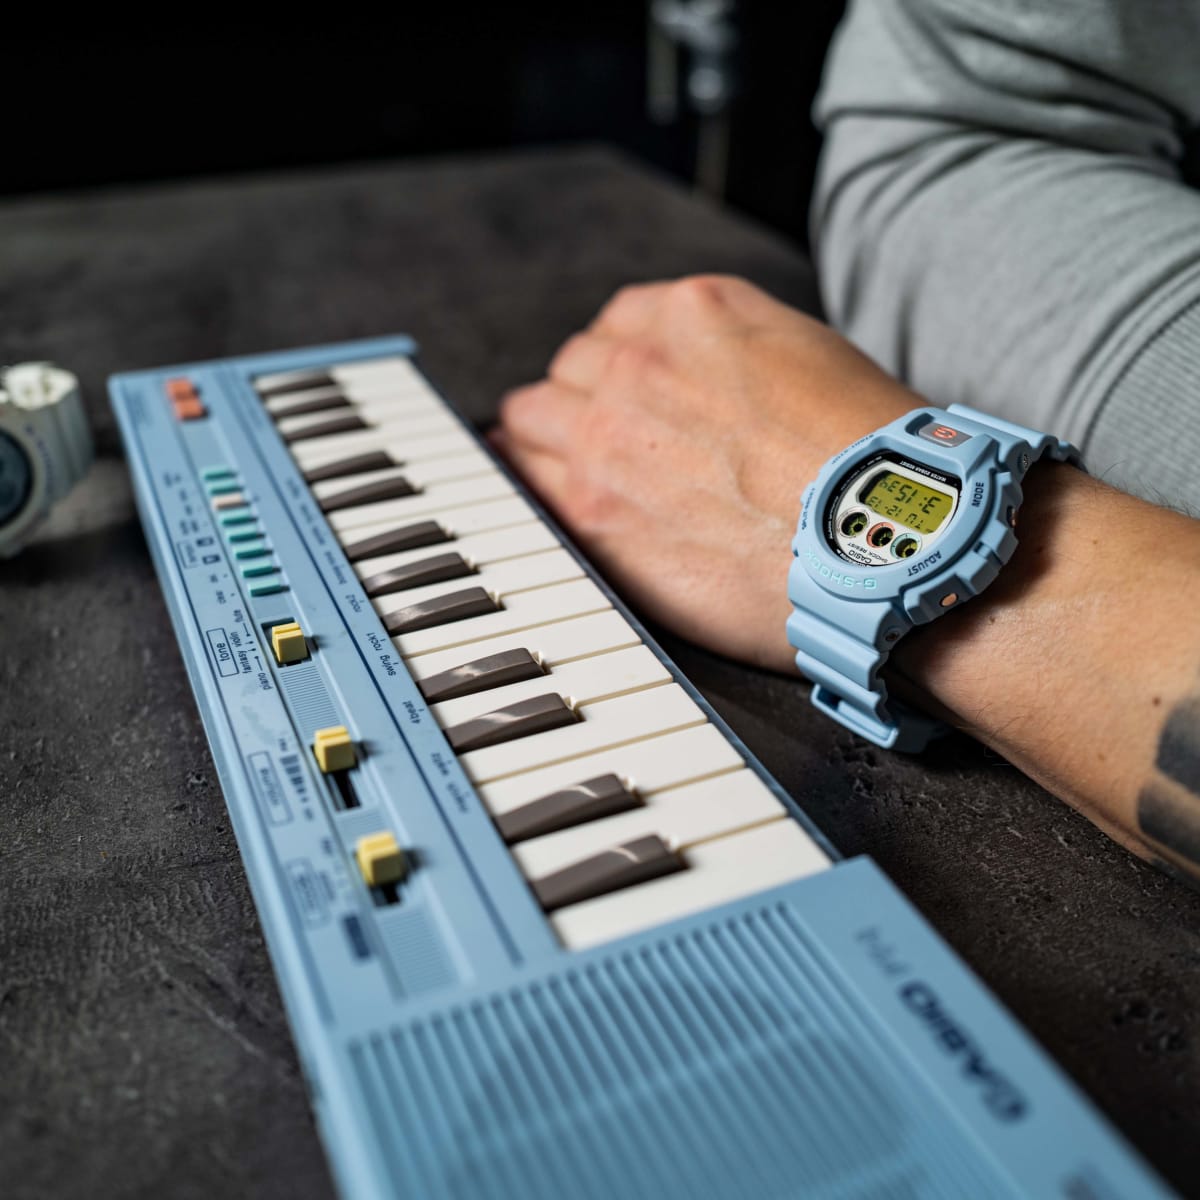 John Mayer and Hodinkee release the final model in their G-Shock